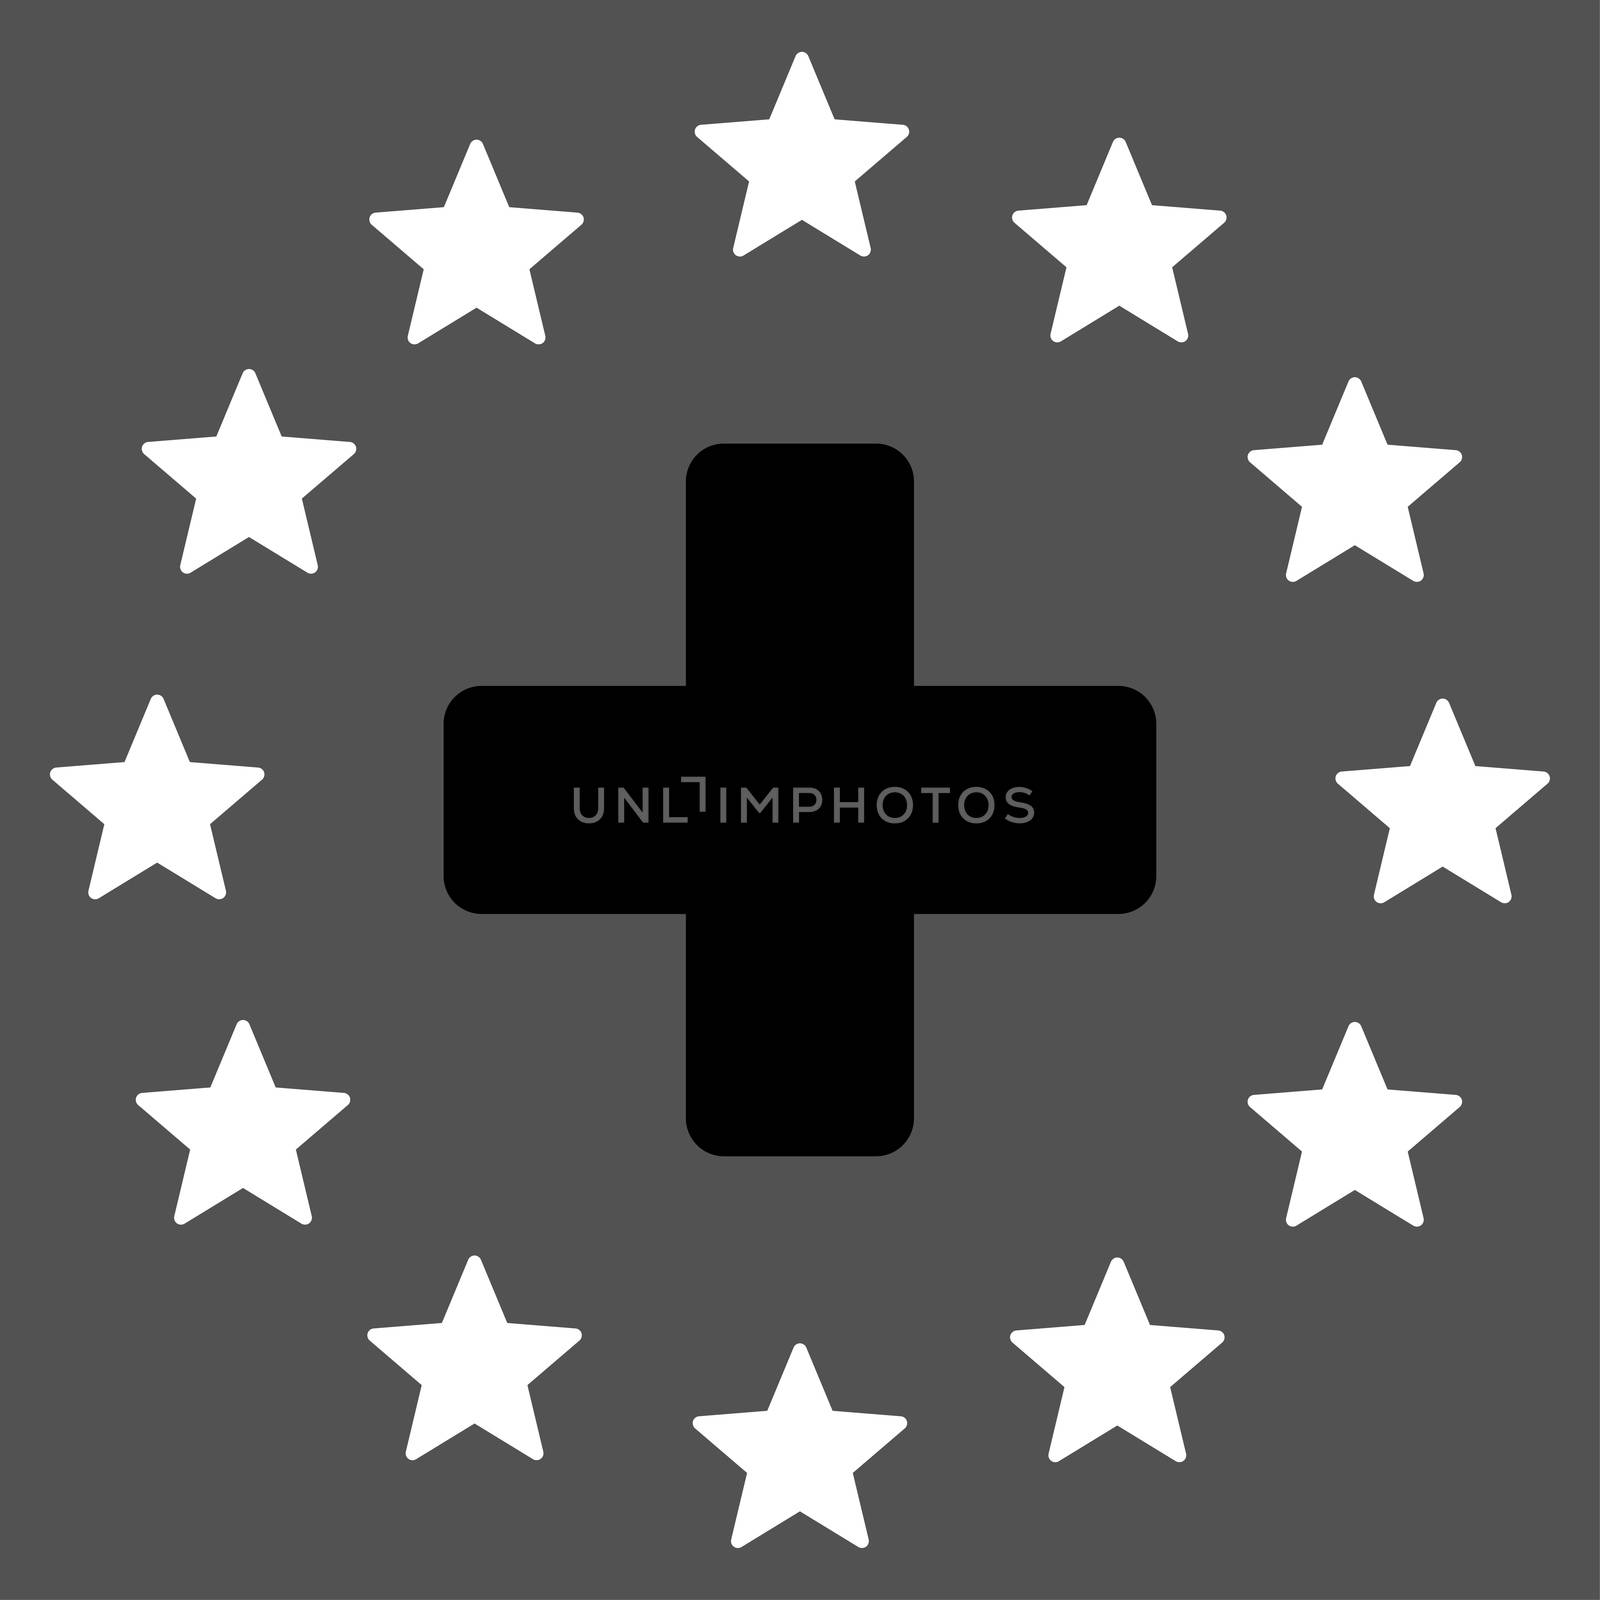 Euro Medicine raster icon. Style is bicolor flat symbol, black and white colors, rounded angles, gray background.